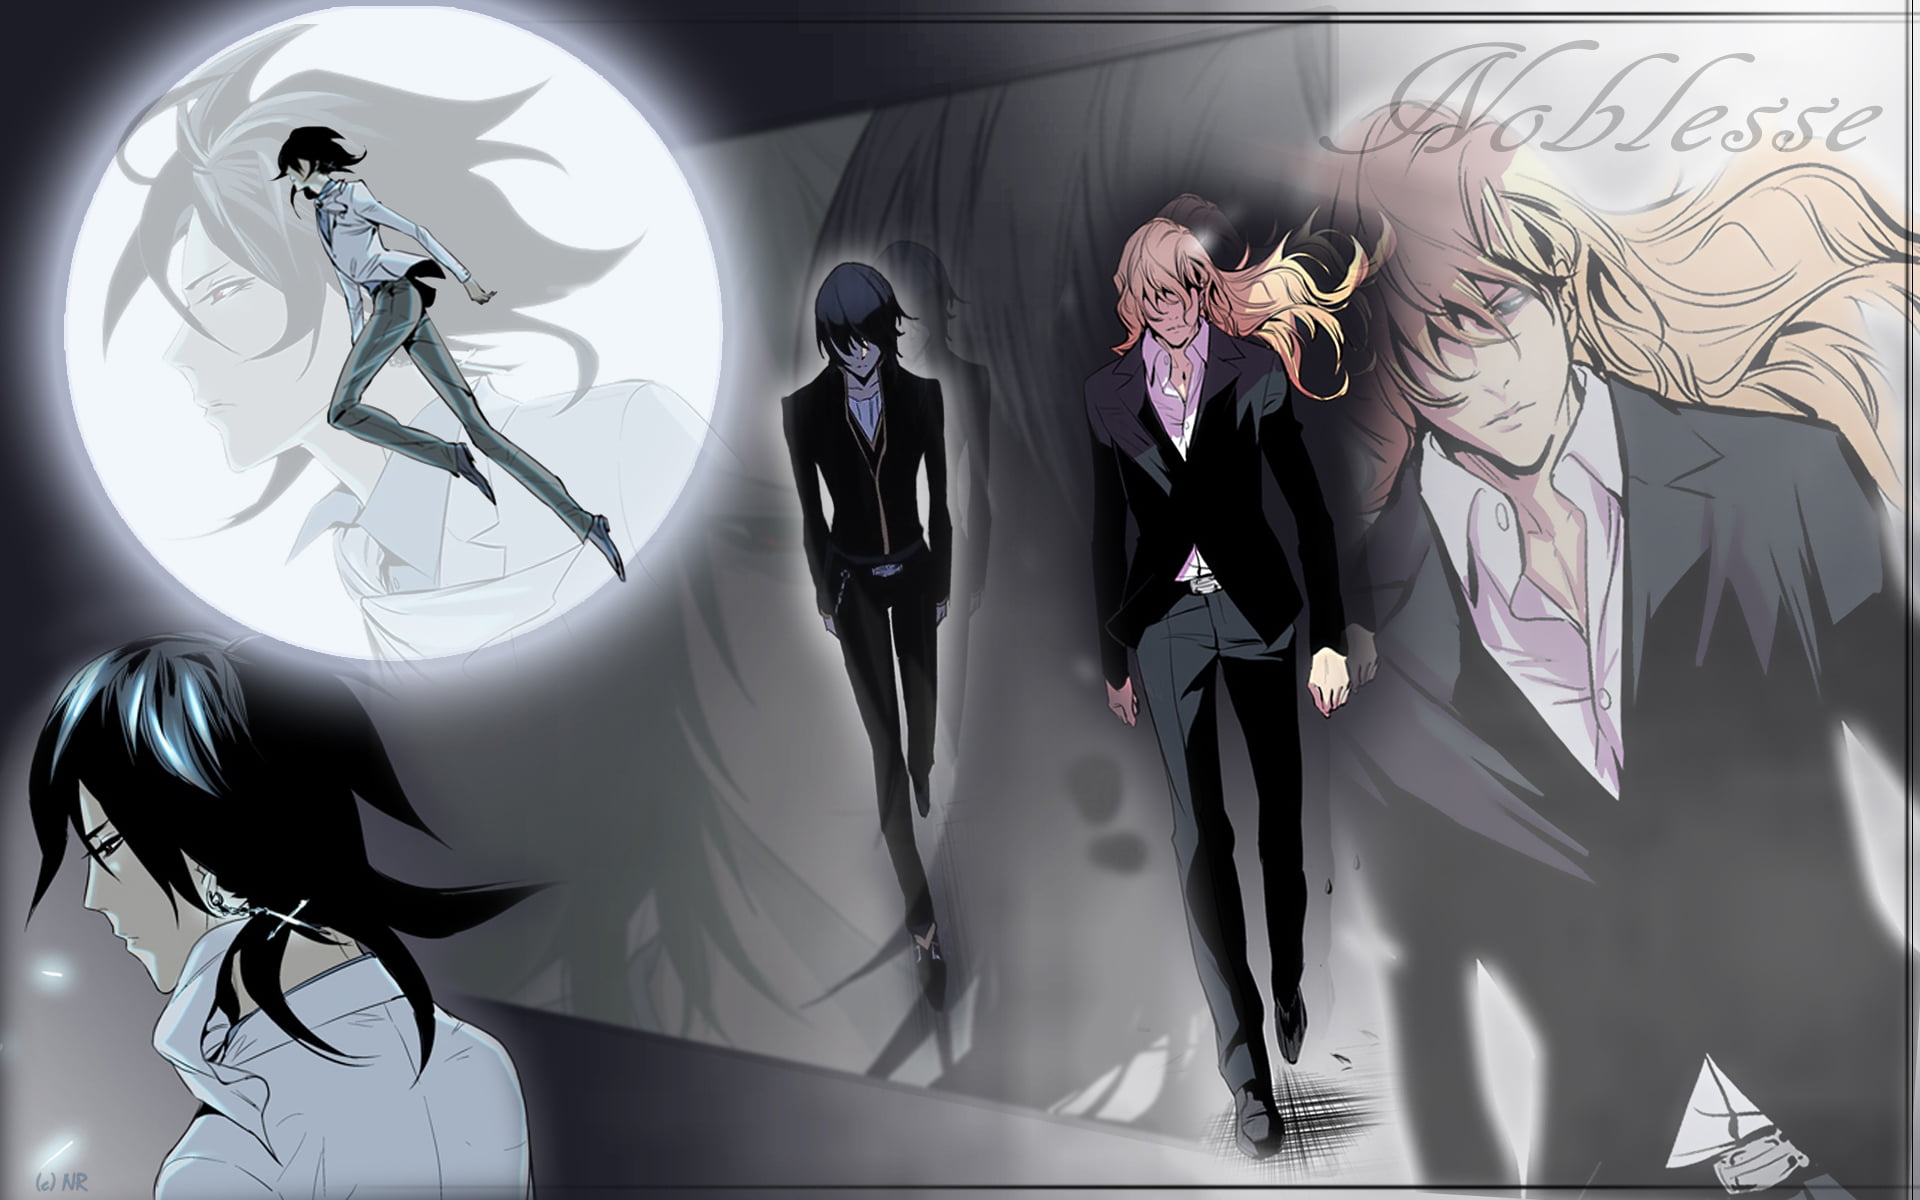 Noblesse Anime Character Hd Wallpaper Wallpaper Flare Of the 107271 characters on anime characters database, 29 are from the manga noblesse. noblesse anime character hd wallpaper